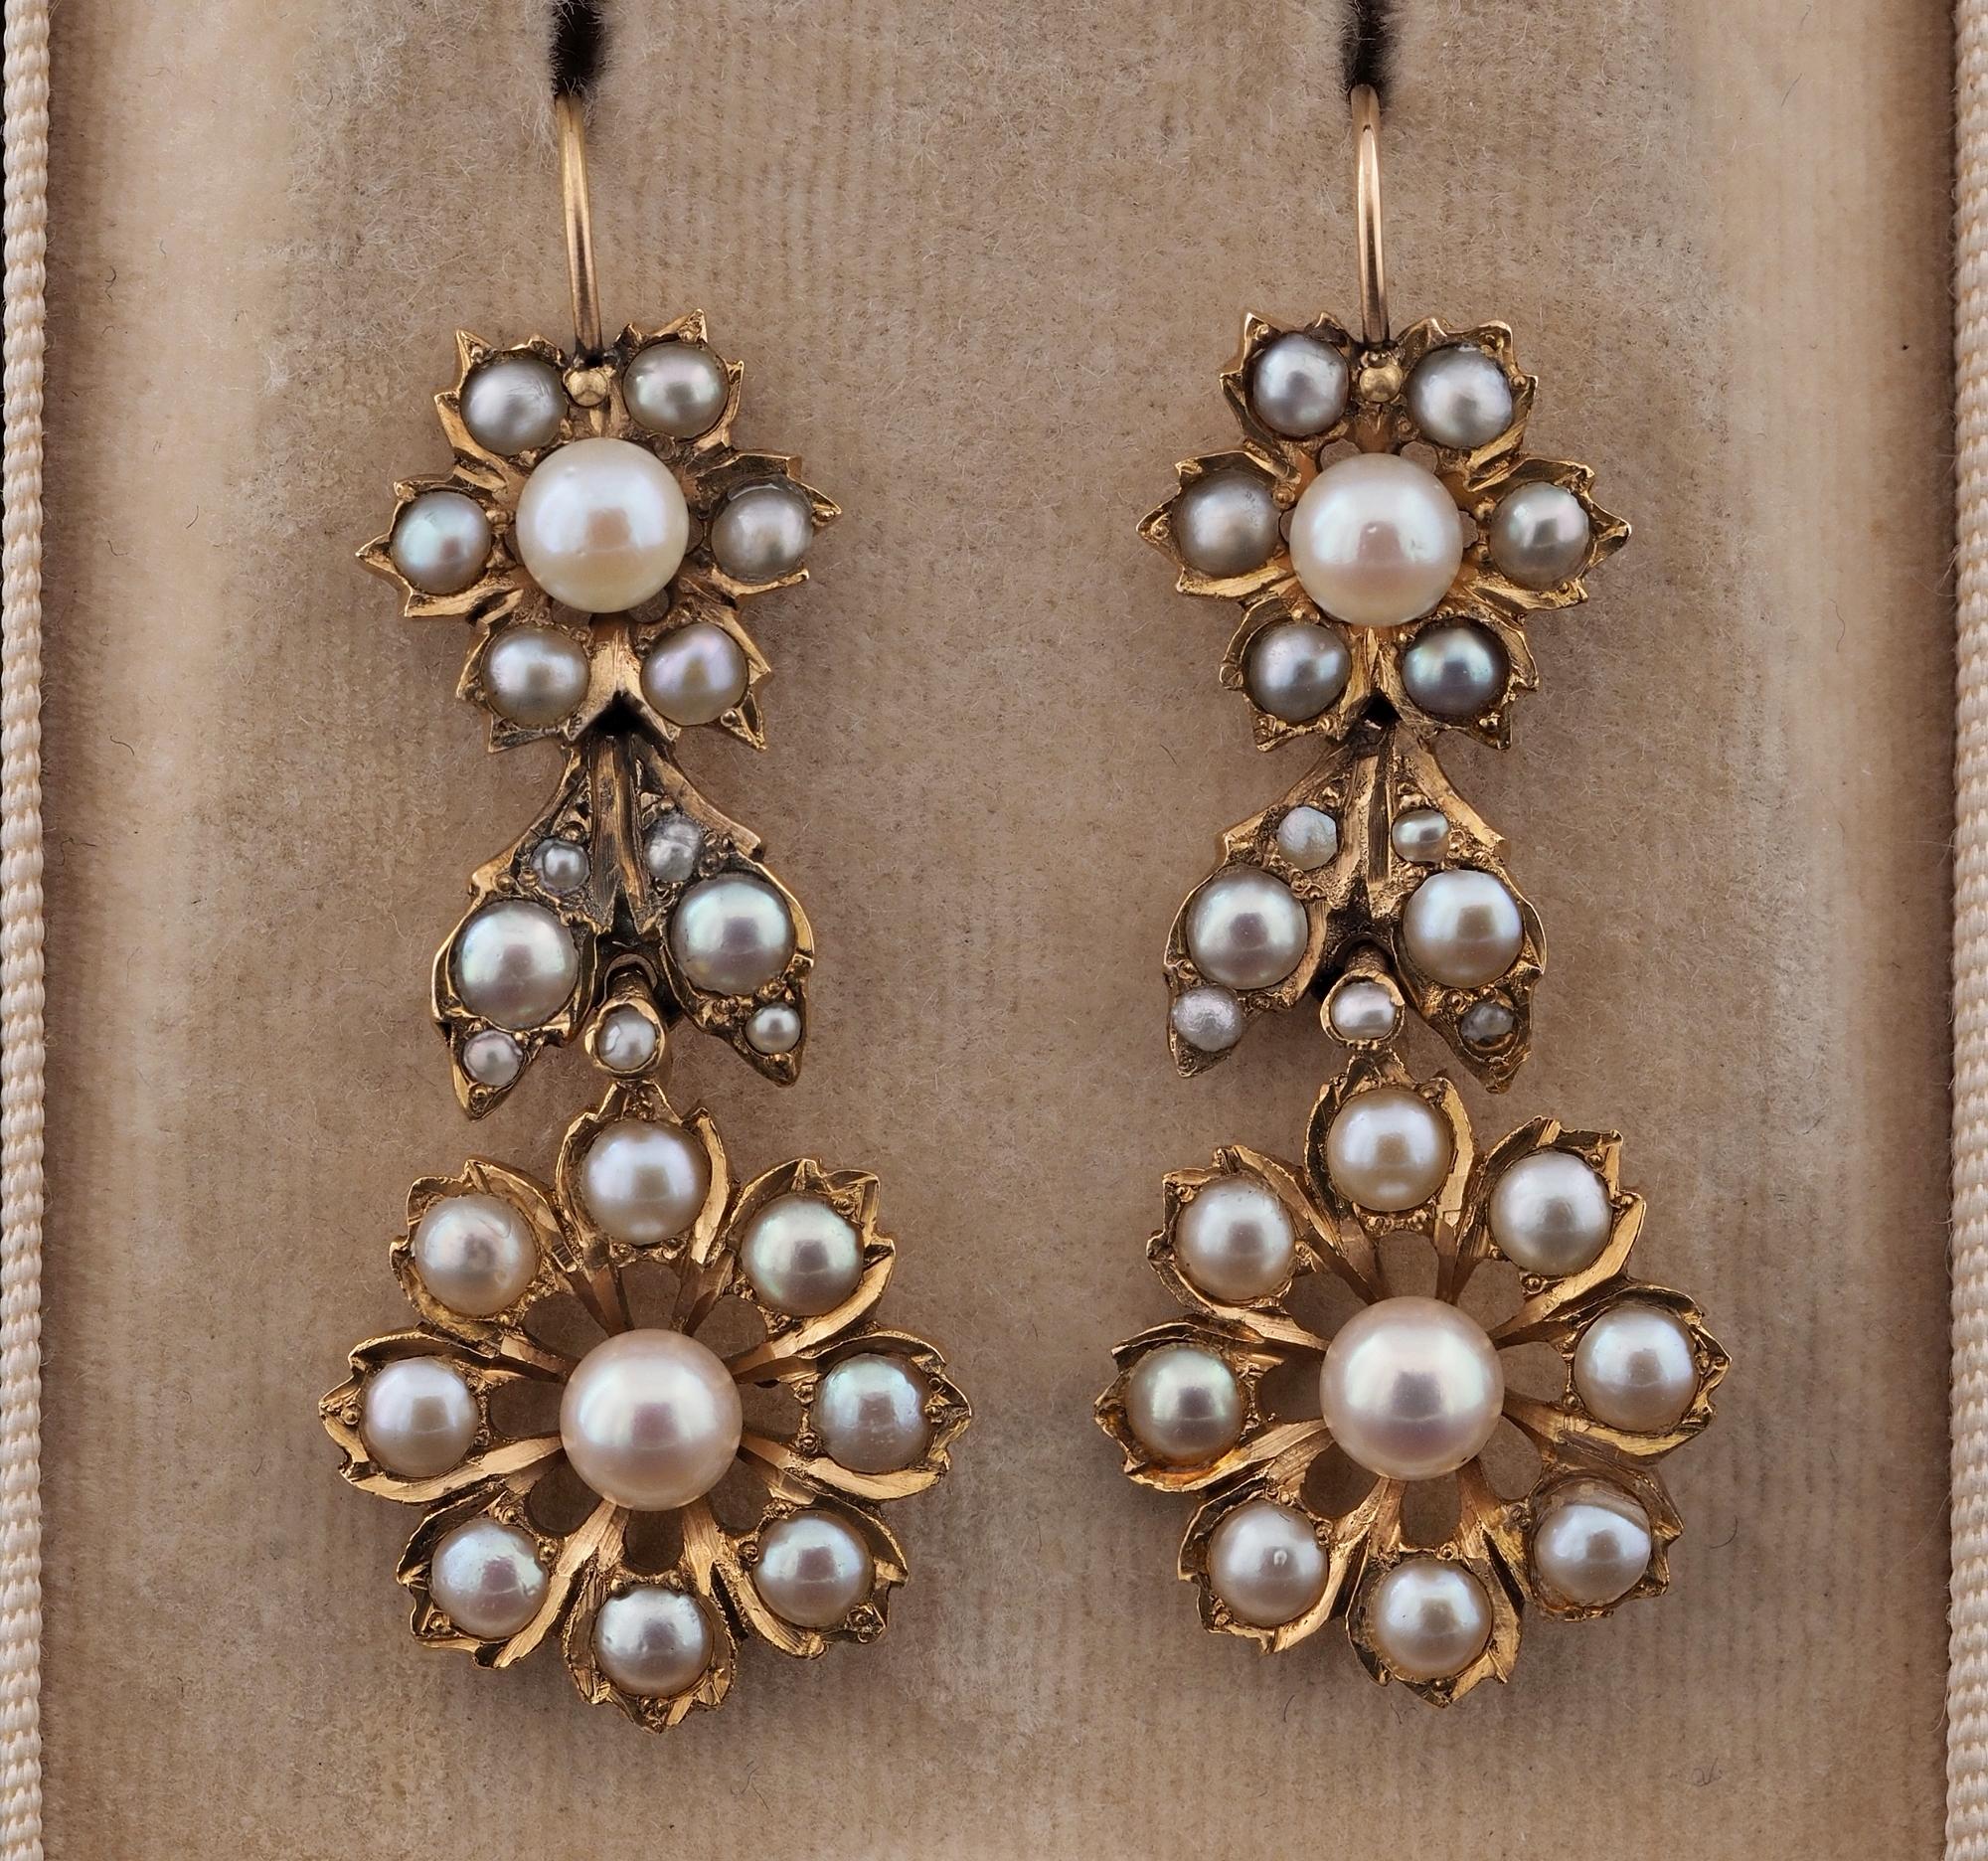 Victorian Classy Statement
These outstanding long drop earrings are in the classy Victorian tradition
Hand crafted of solid 18 KT gold, 1890 ca – gold close back on the reverse
They are made into three sections, flower designed into naturalistic